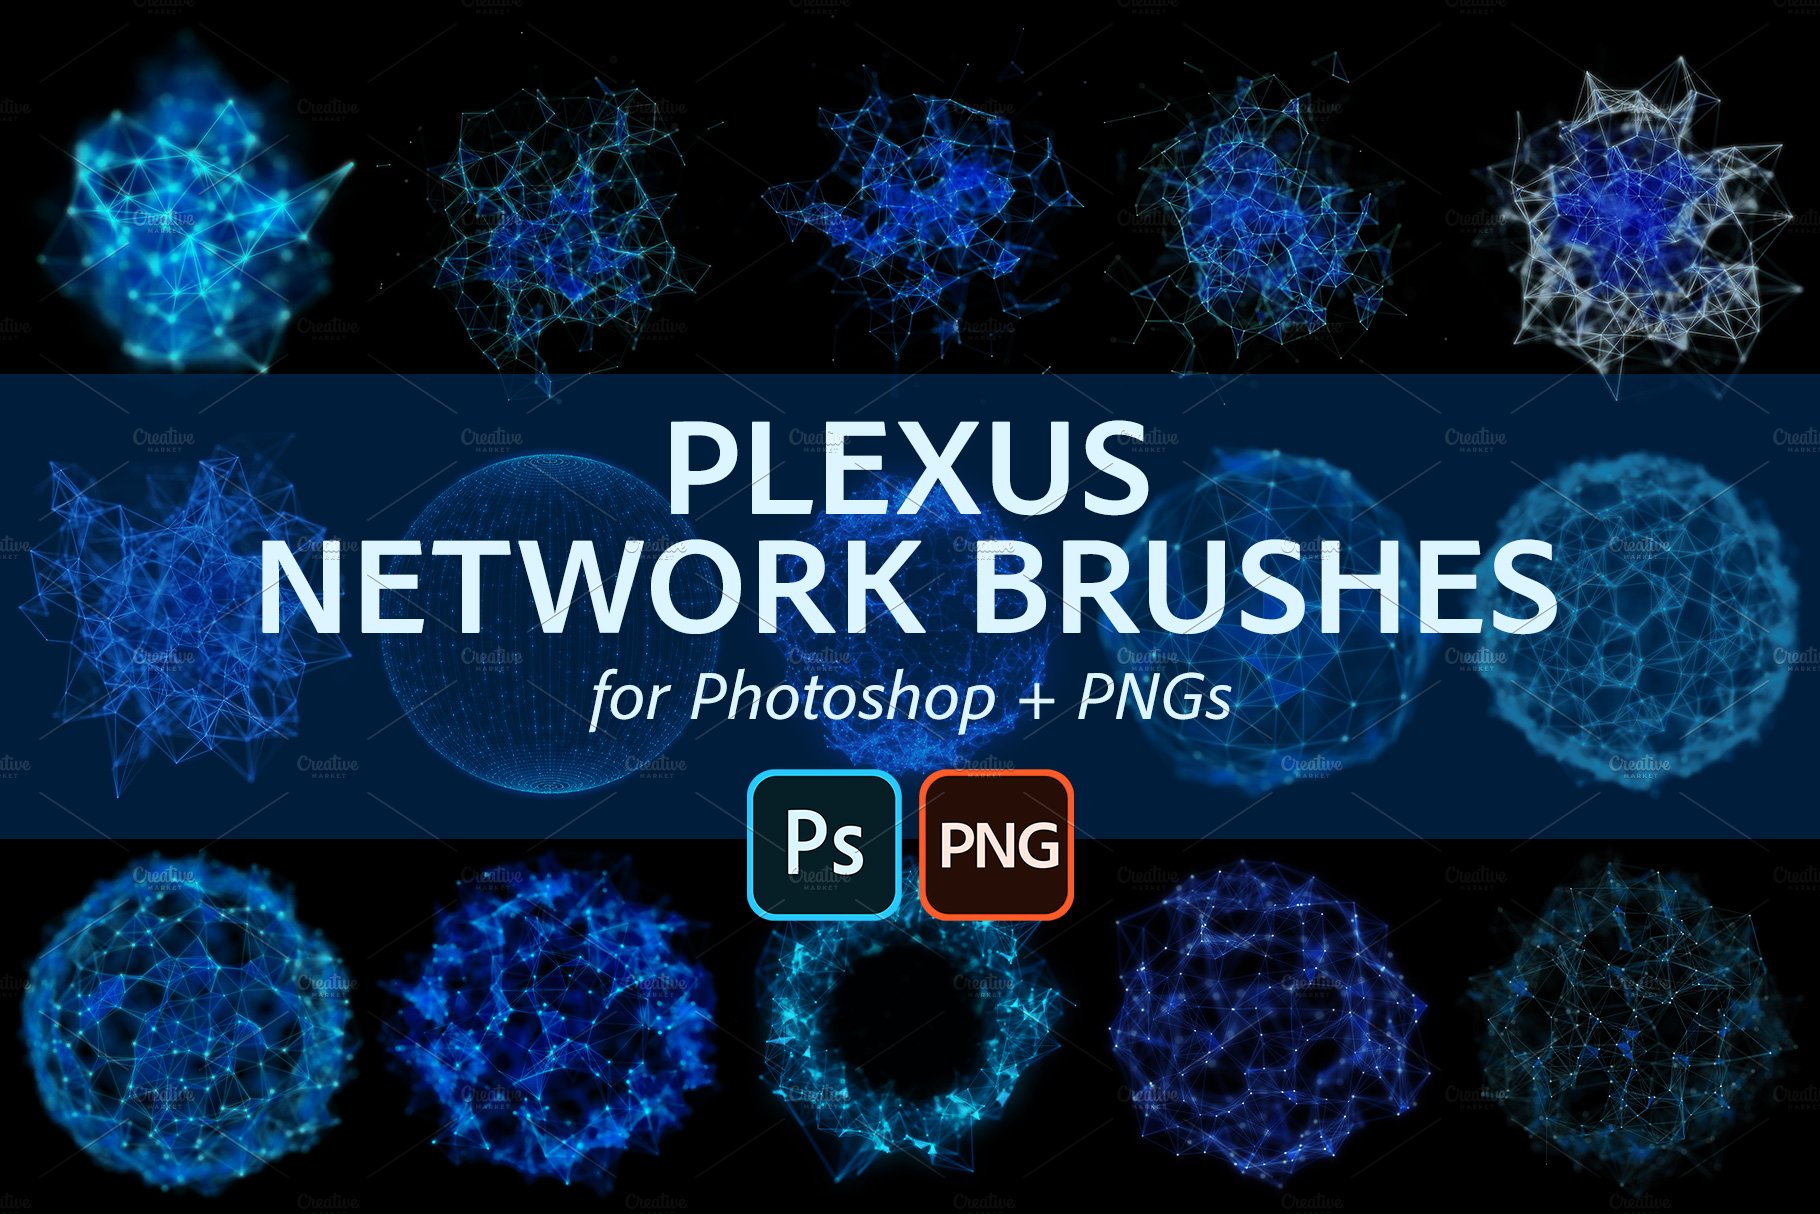 Plexus Network PS Brushes and PNGscover image.